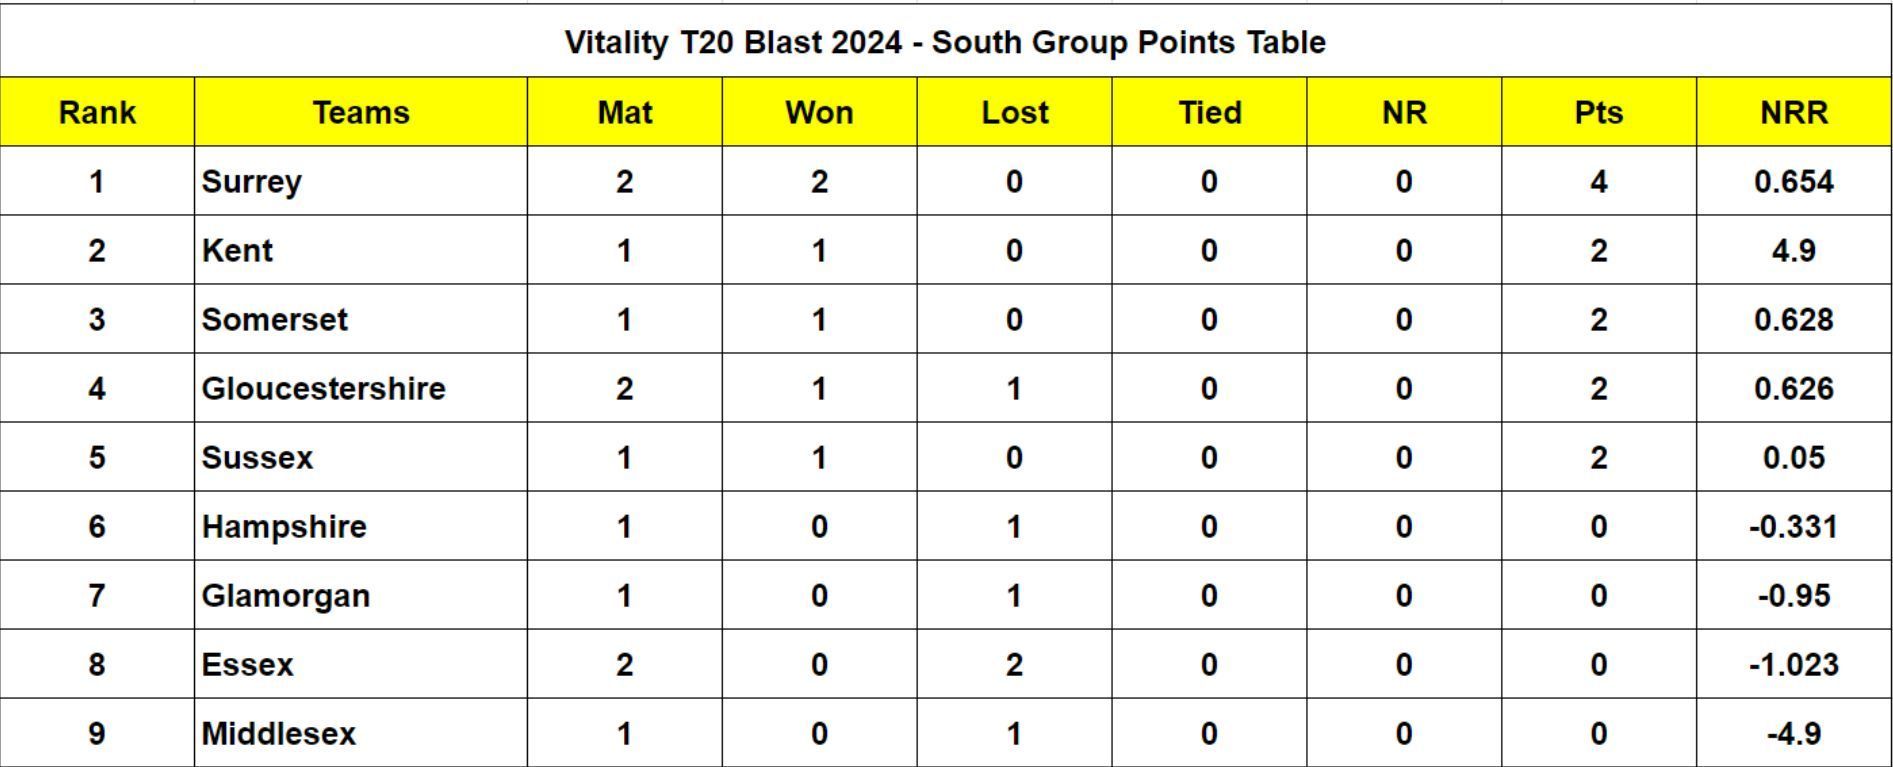 Vitality T20 Blast 2024 - South Group Points Table Updated